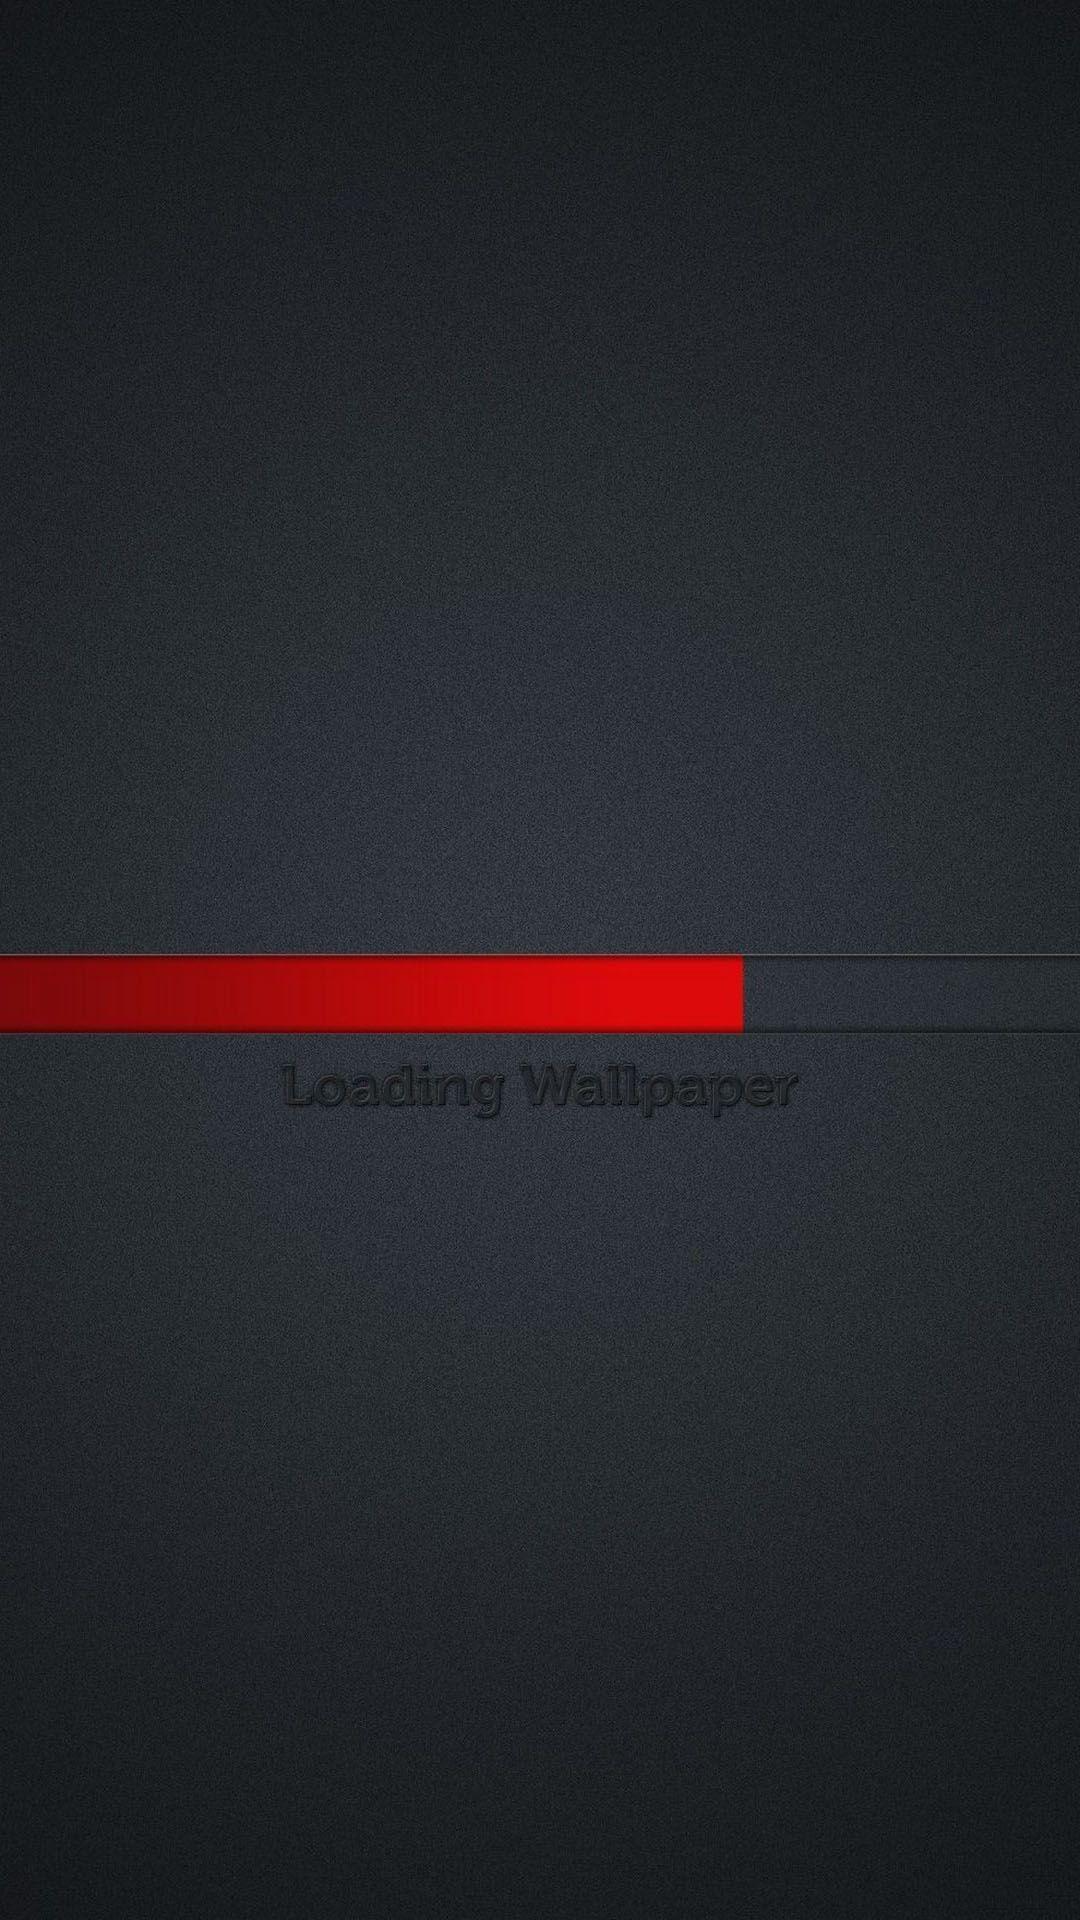 Loading Wallpaper Red Line Grey Background Android Wallpaper